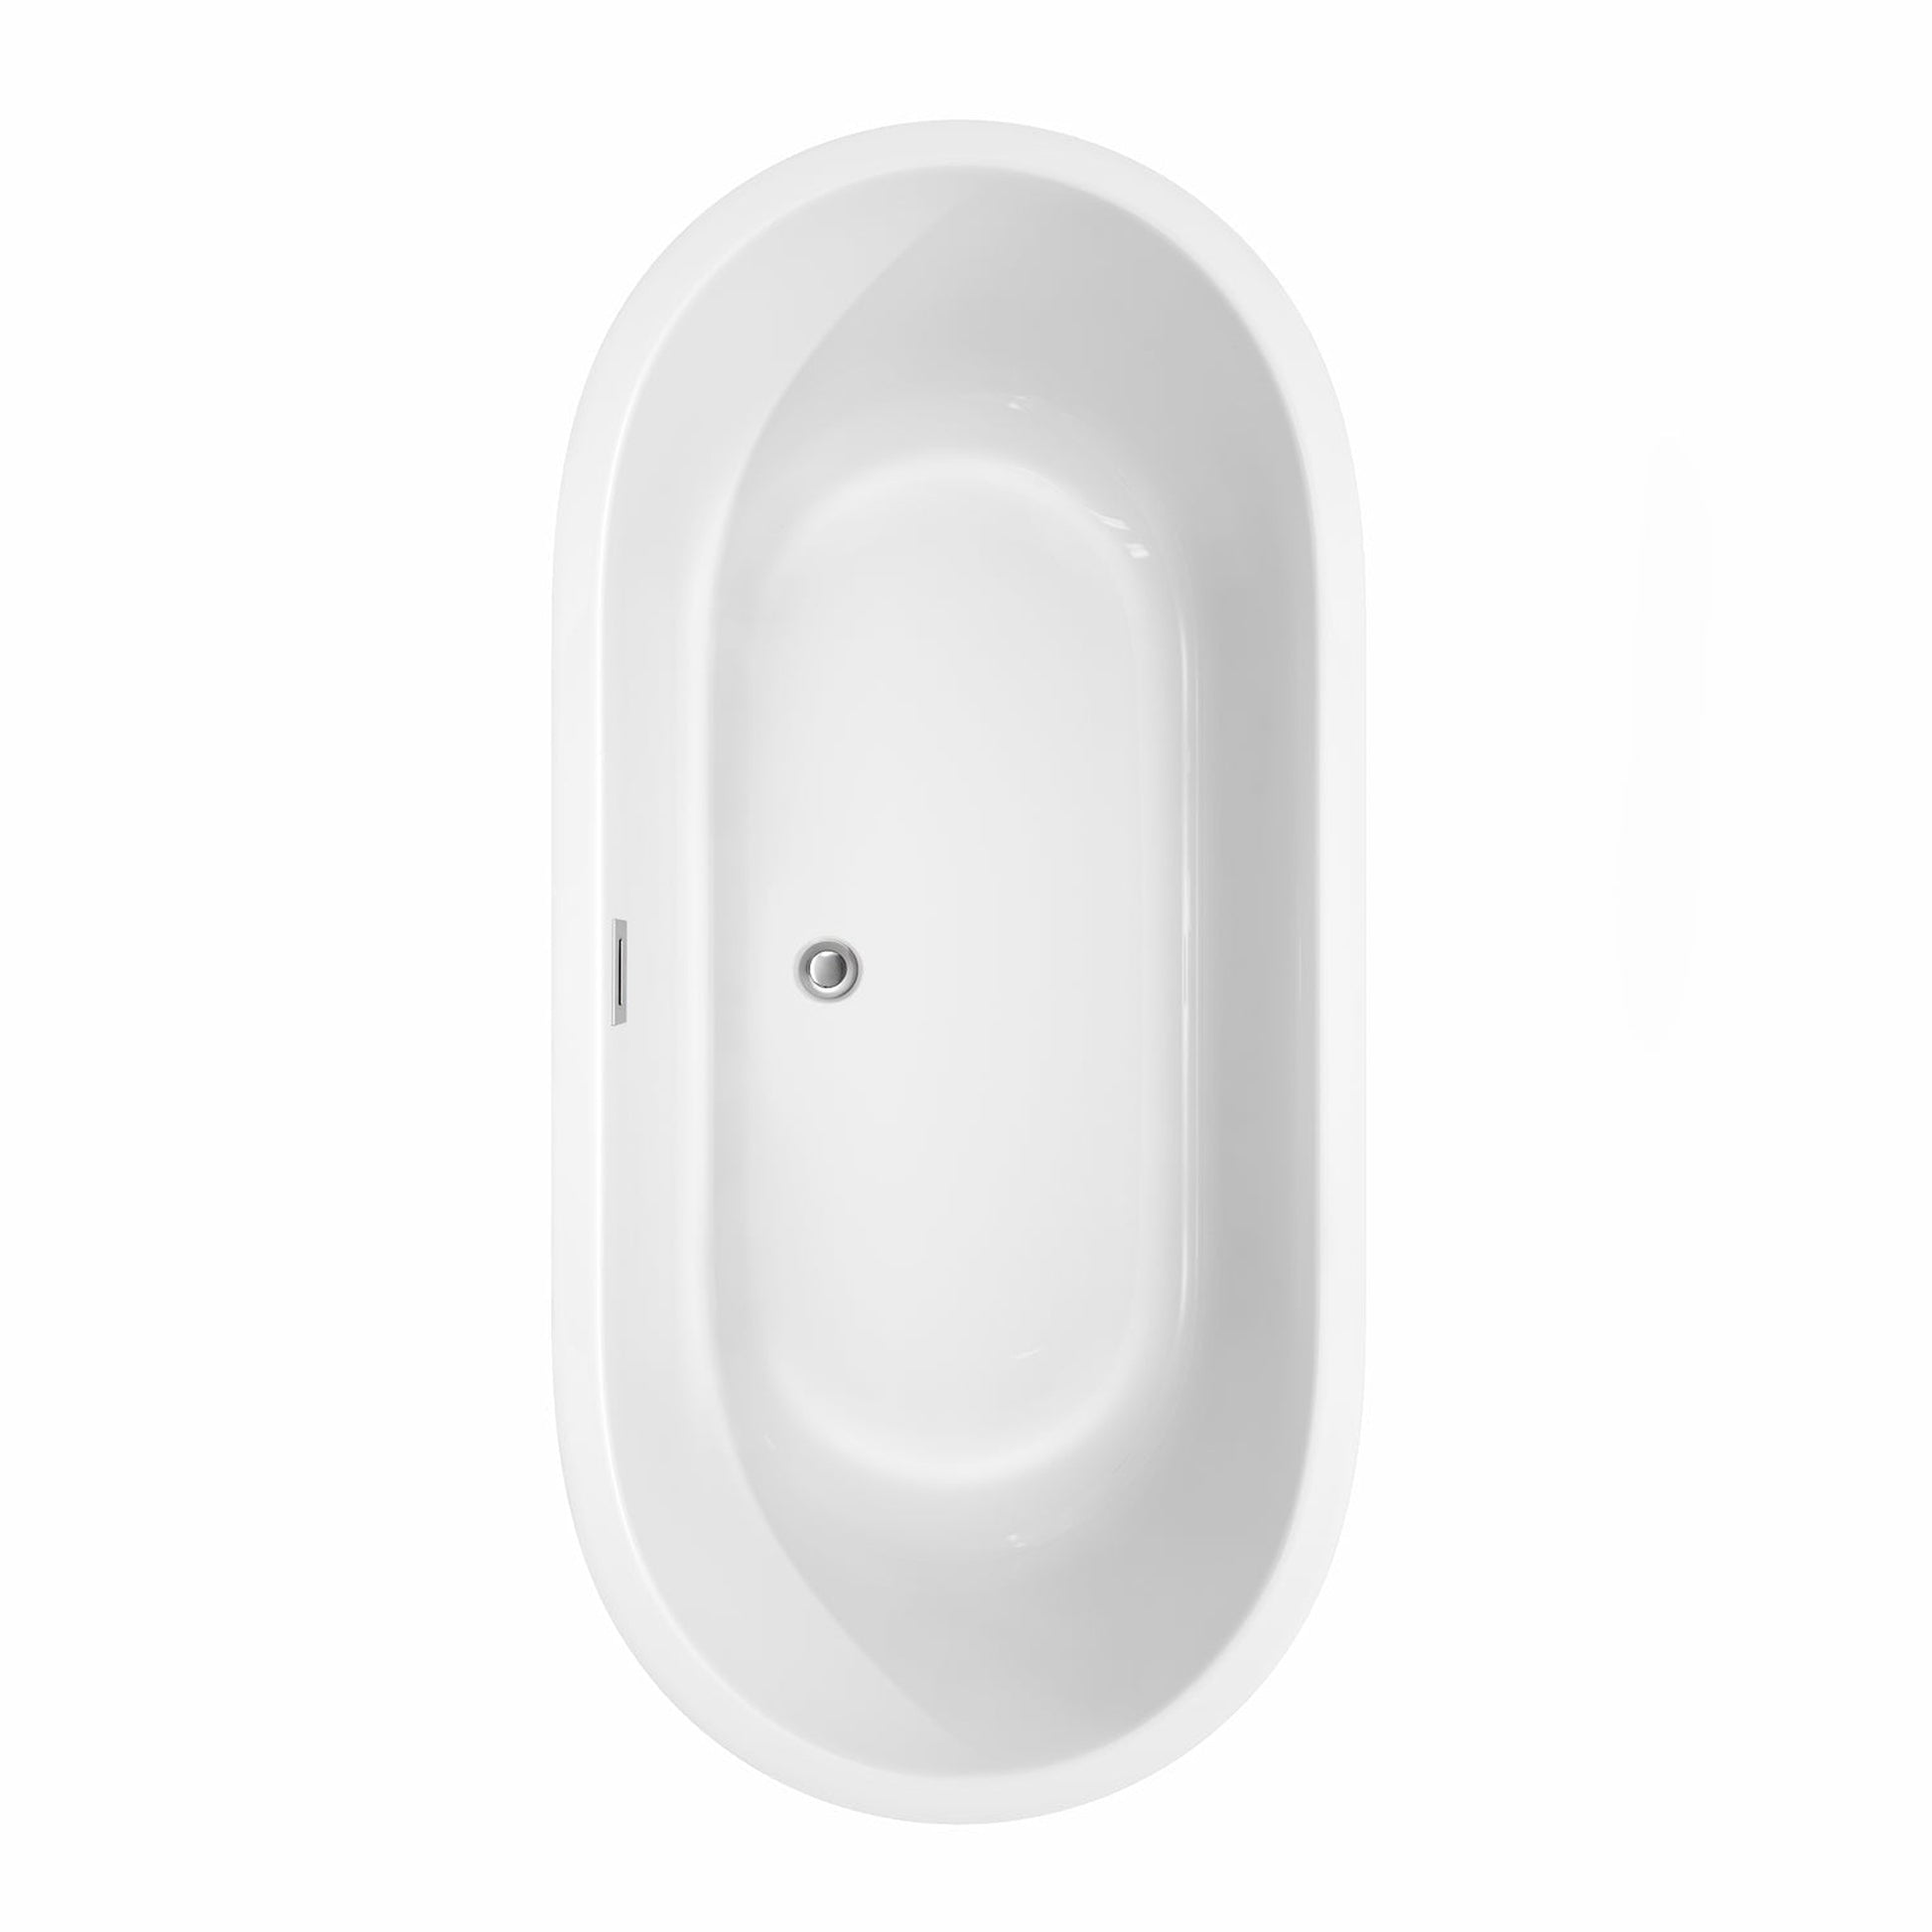 Wyndham Collection Juliette 67" Freestanding Bathtub in White With Polished Chrome Drain and Overflow Trim